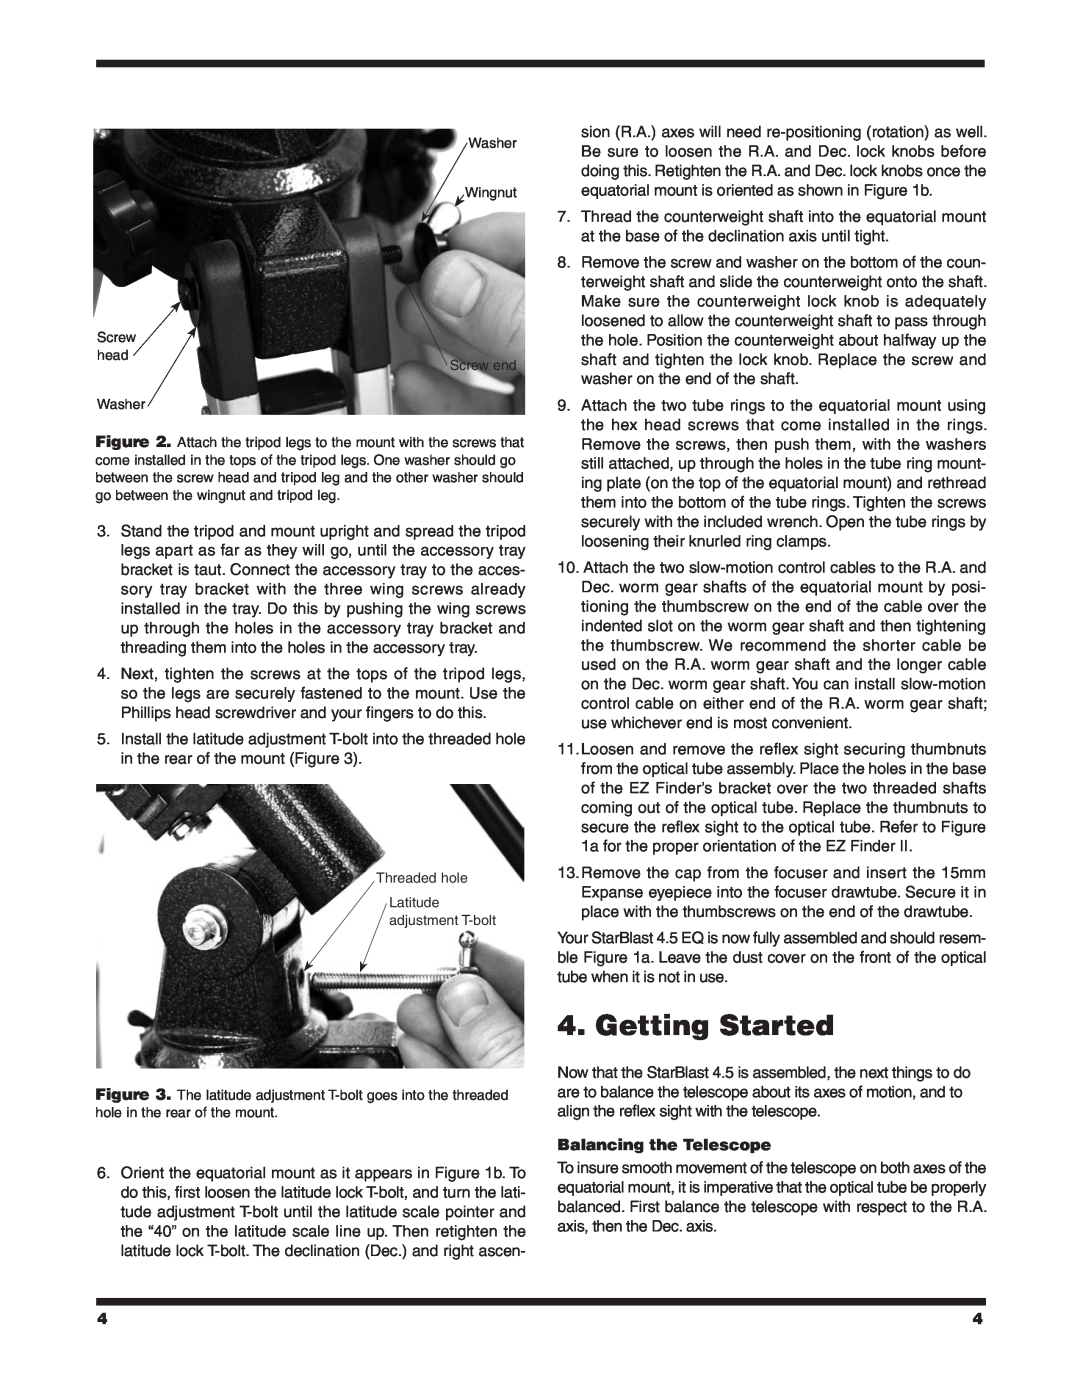 Orion 4.5 EQ instruction manual Getting Started, Balancing the Telescope 